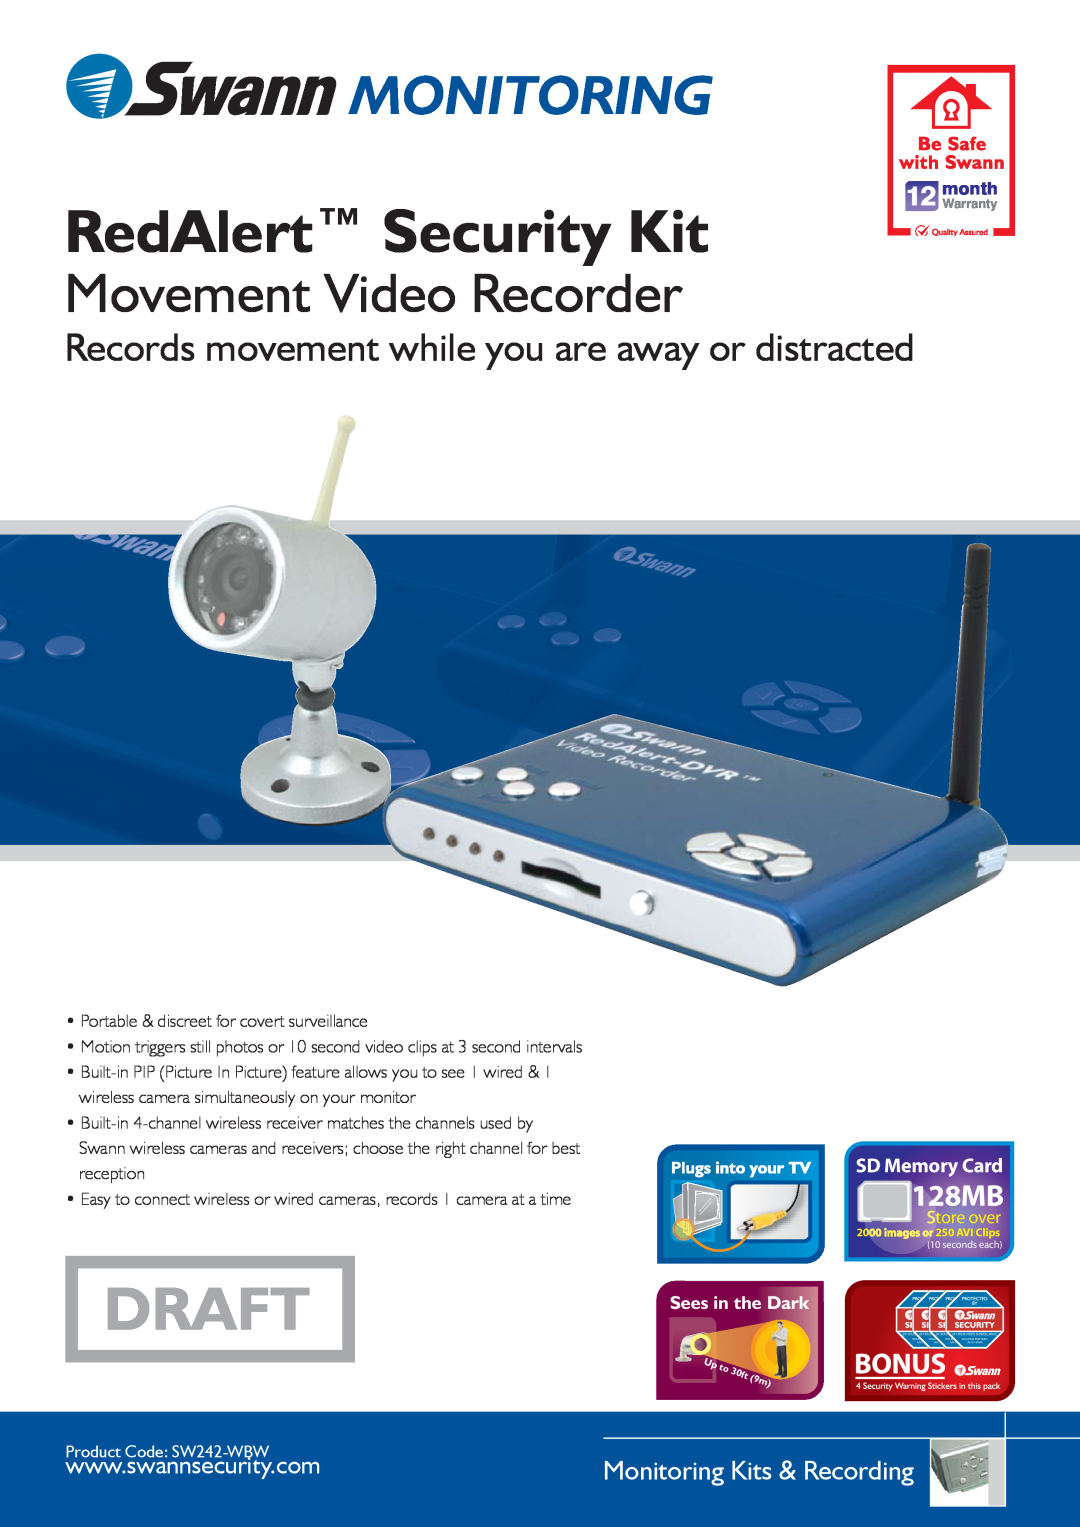 Swann SW242-WBW warranty RedAlert Security Kit, Monitoring, Movement Video Recorder, Draft, 128MB, SD Memory Card 